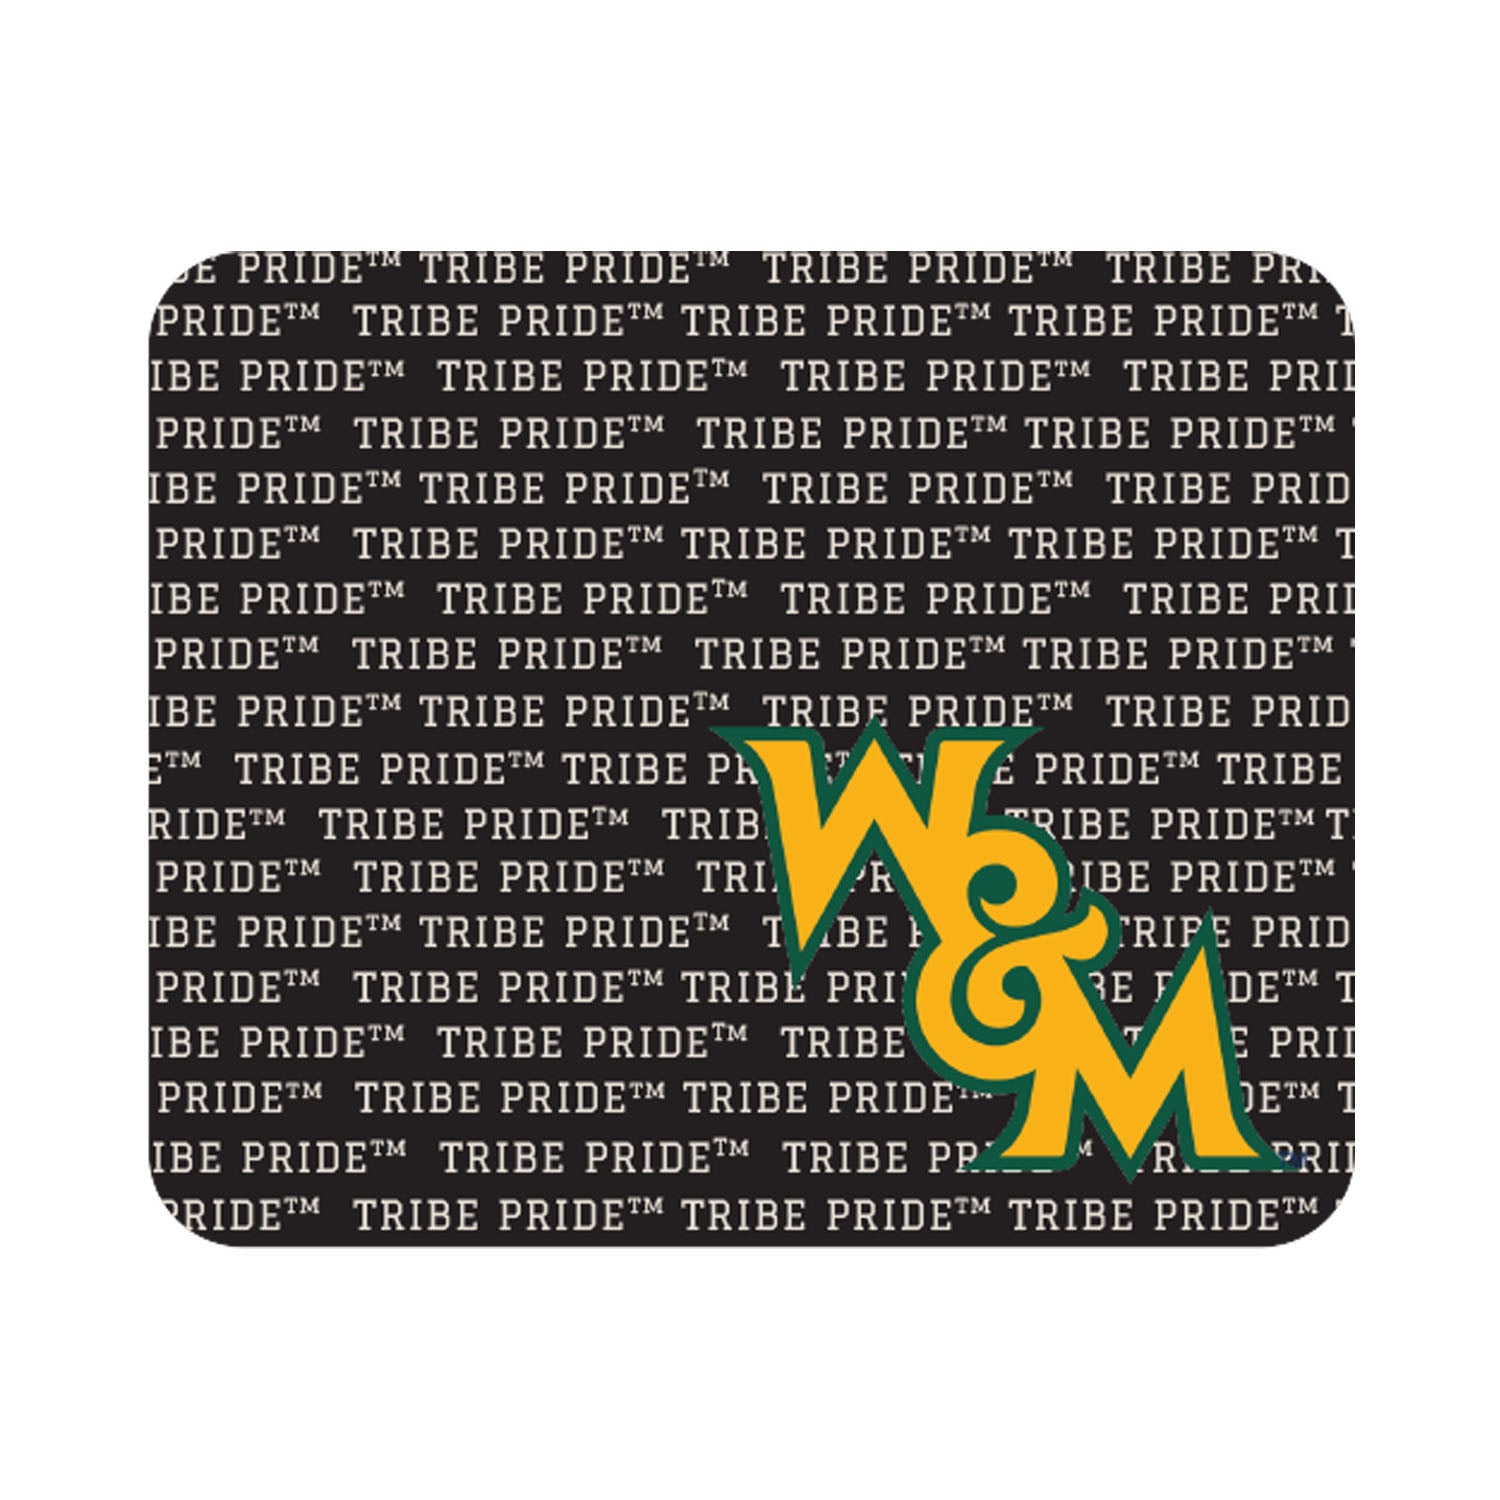 College of William & Mary Mousepad, Classic